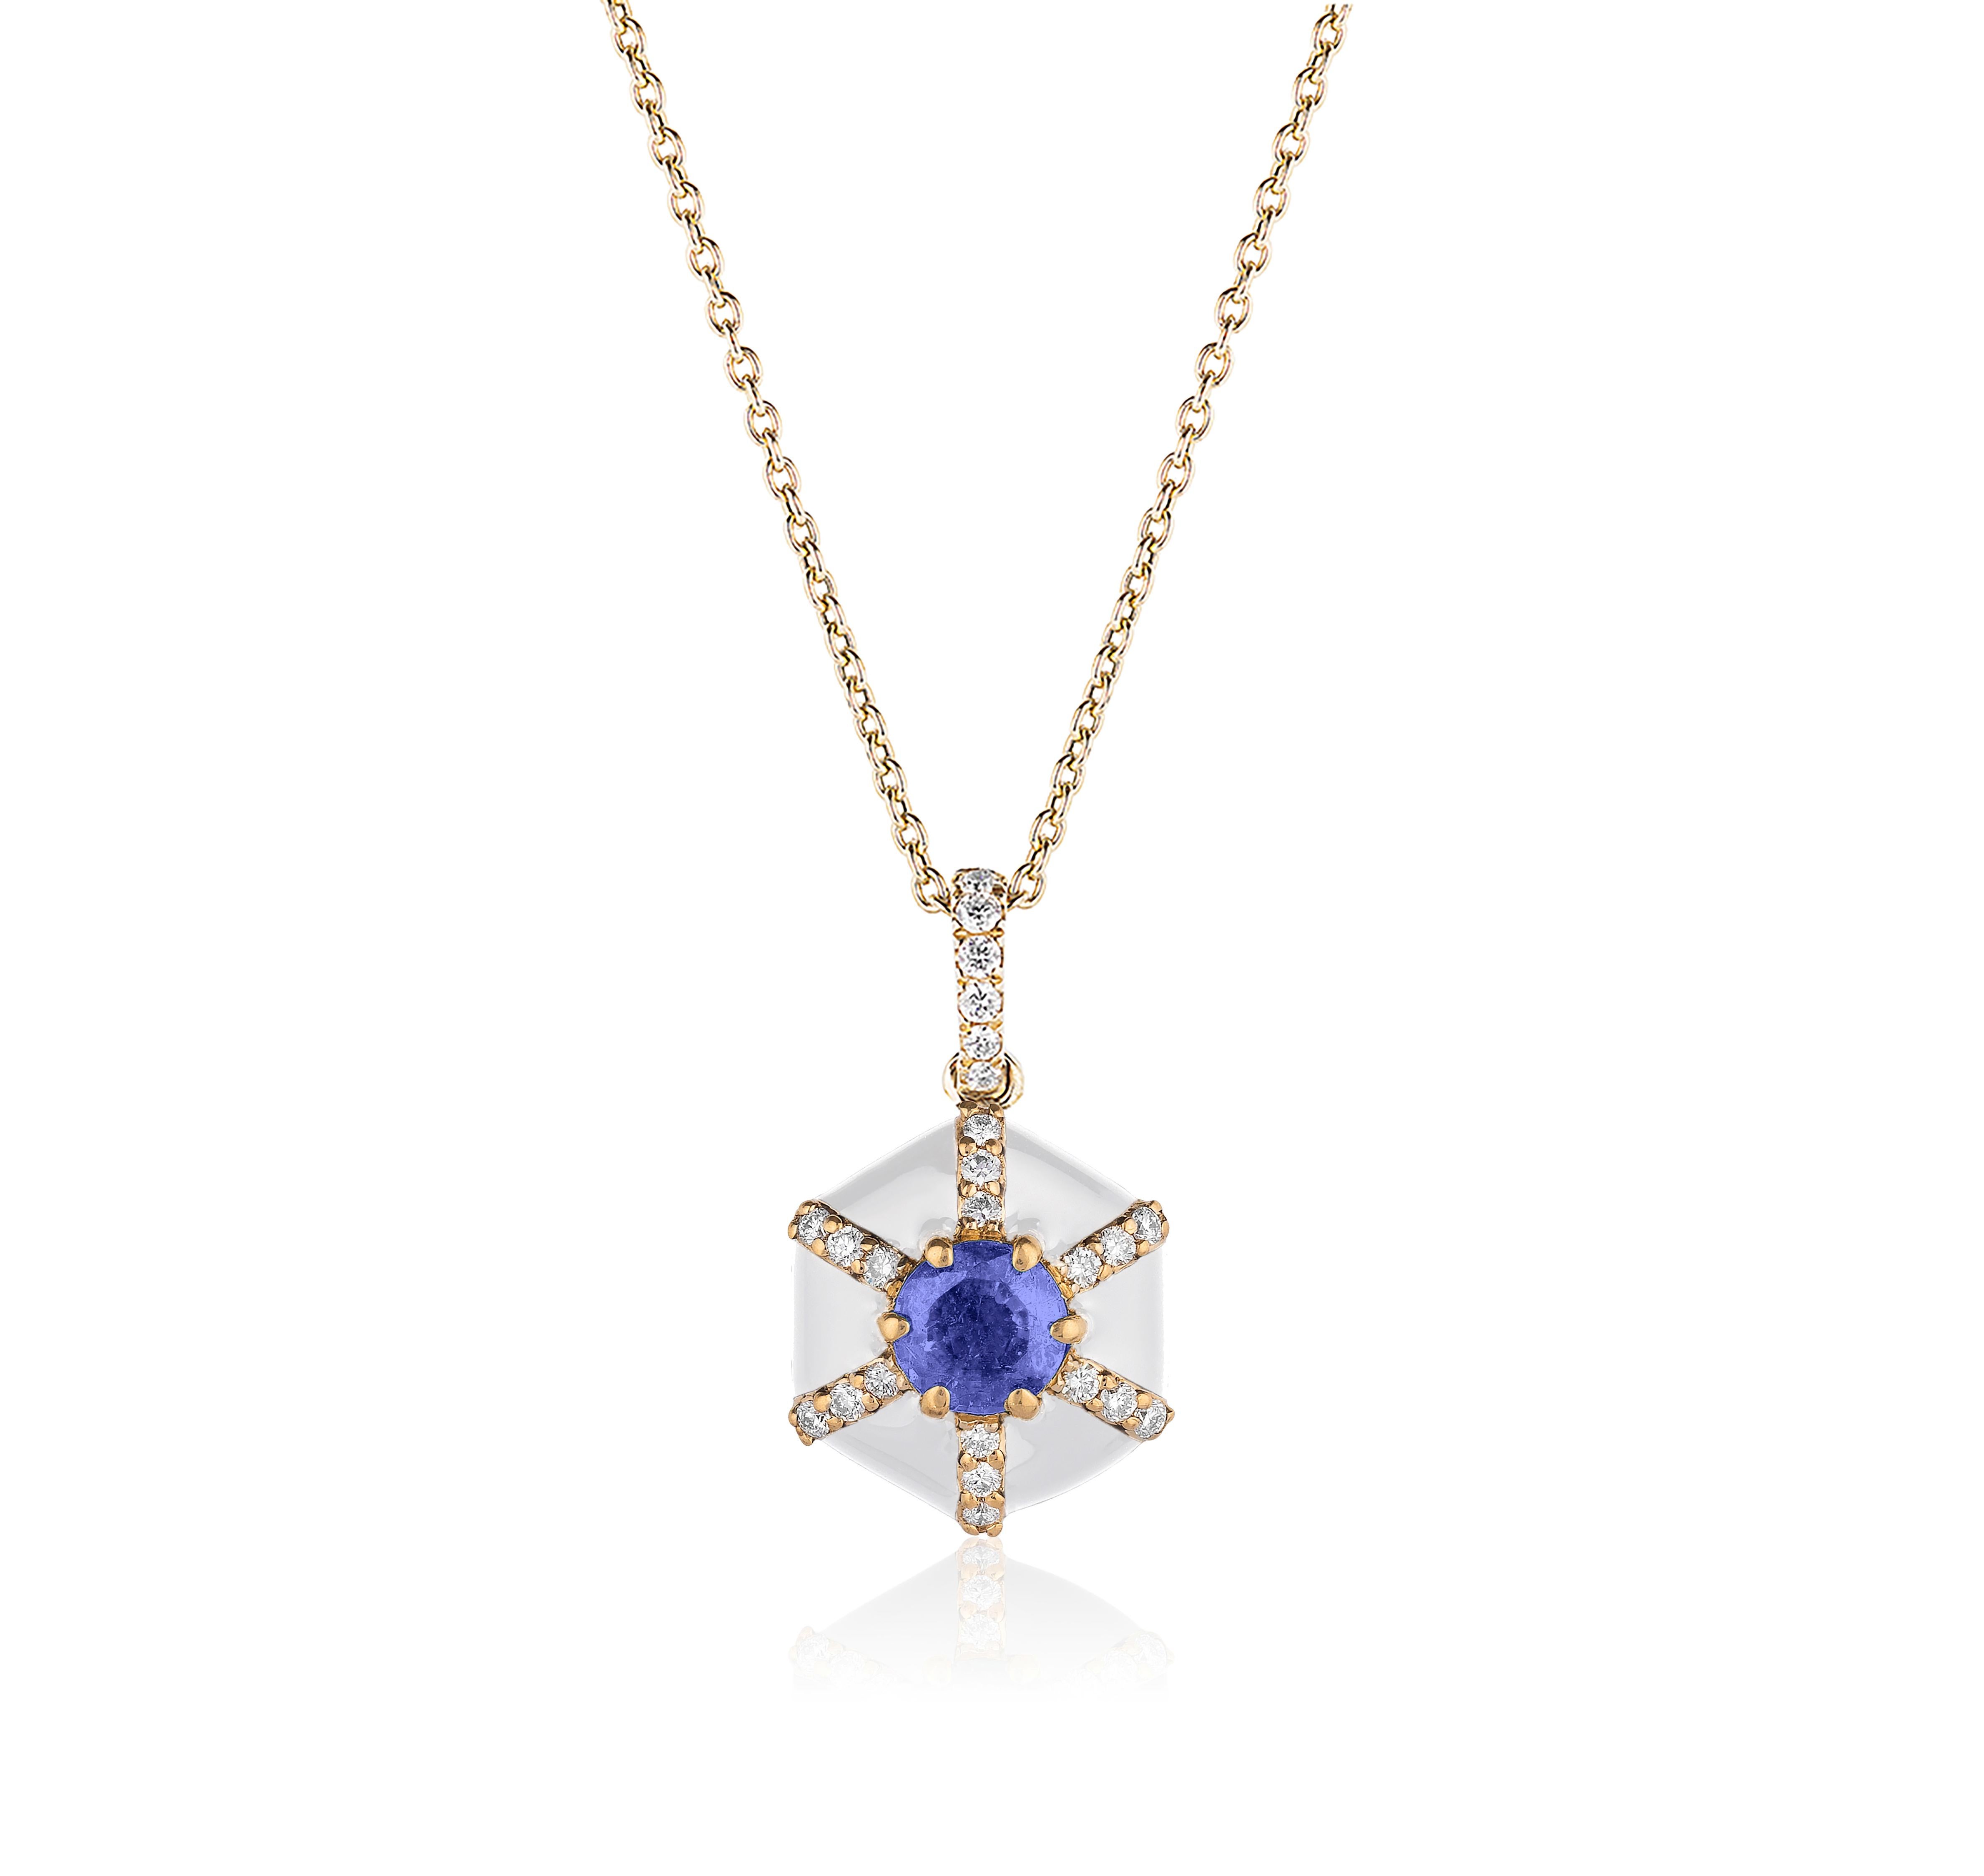 'Queen' Hexagon White Enamel Pendant with Sapphire And Diamond in 18K Yellow Gold.
Stone Size: 4 mm 
Gemstone Approx. Stone Wt: Sapphire- 0.20 Carats 
Diamonds: G-H / VS, Approx. Wt: 0.9 Carats